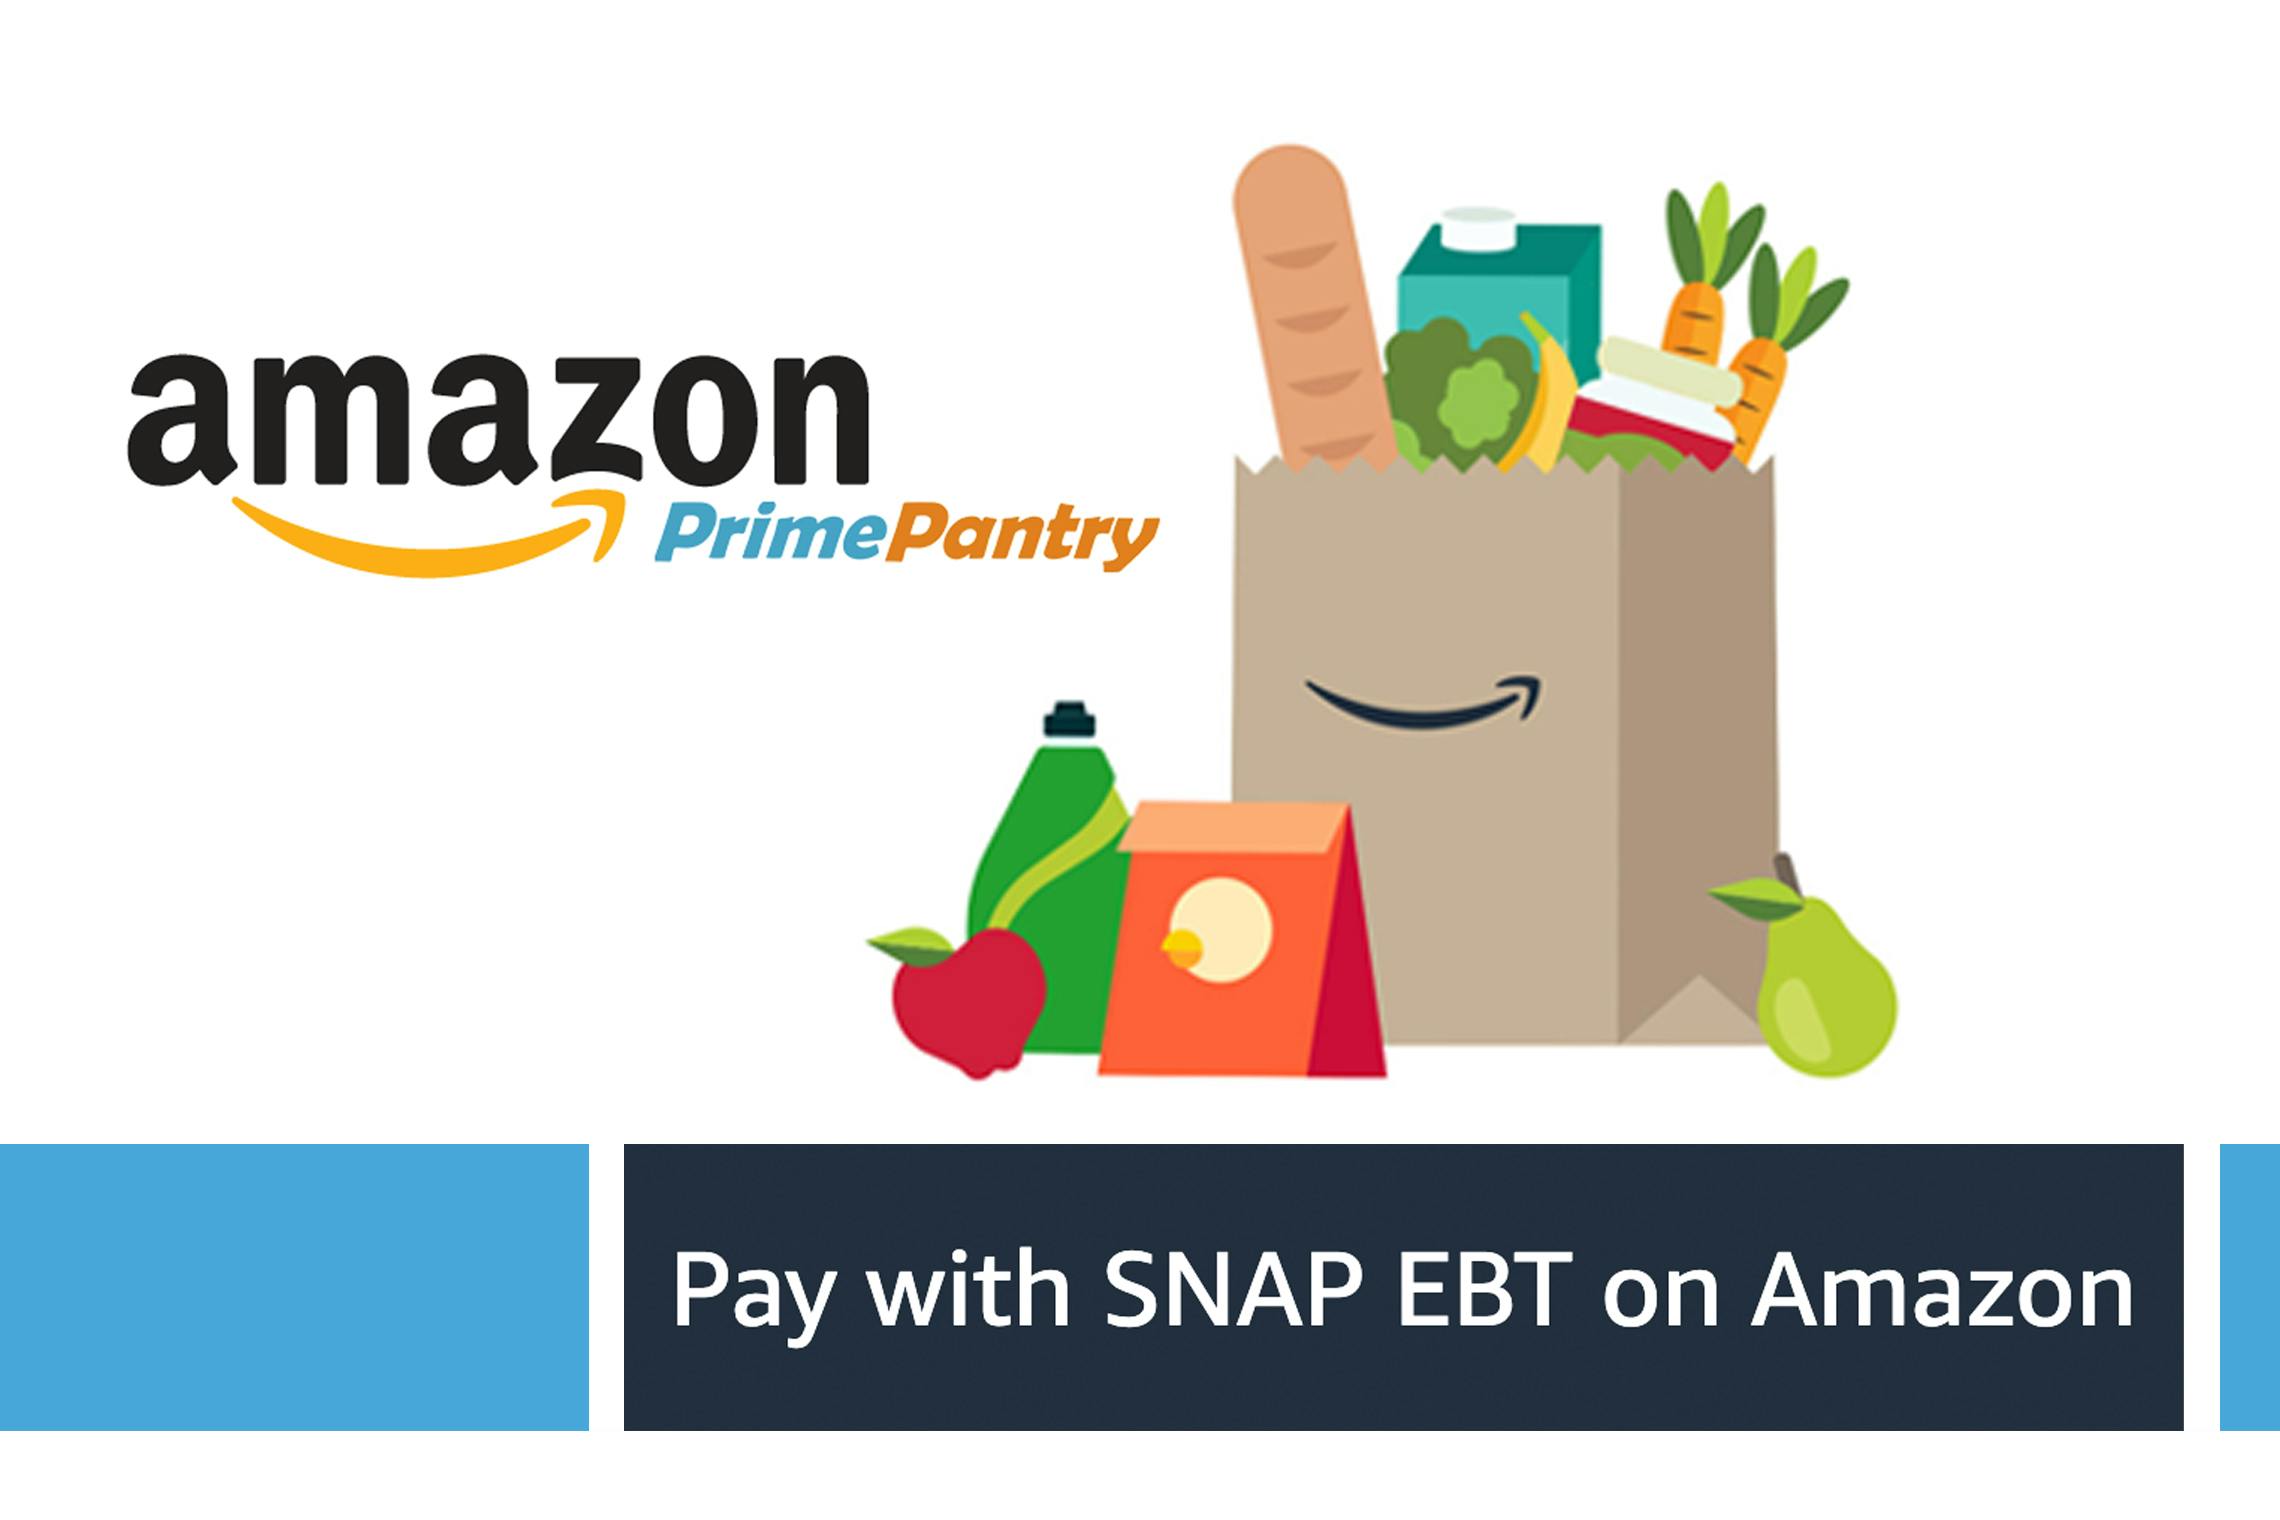 A screenshot of an Amazon Prime Pantry graphic showing you can pay with SNAP EBT on Amazon.